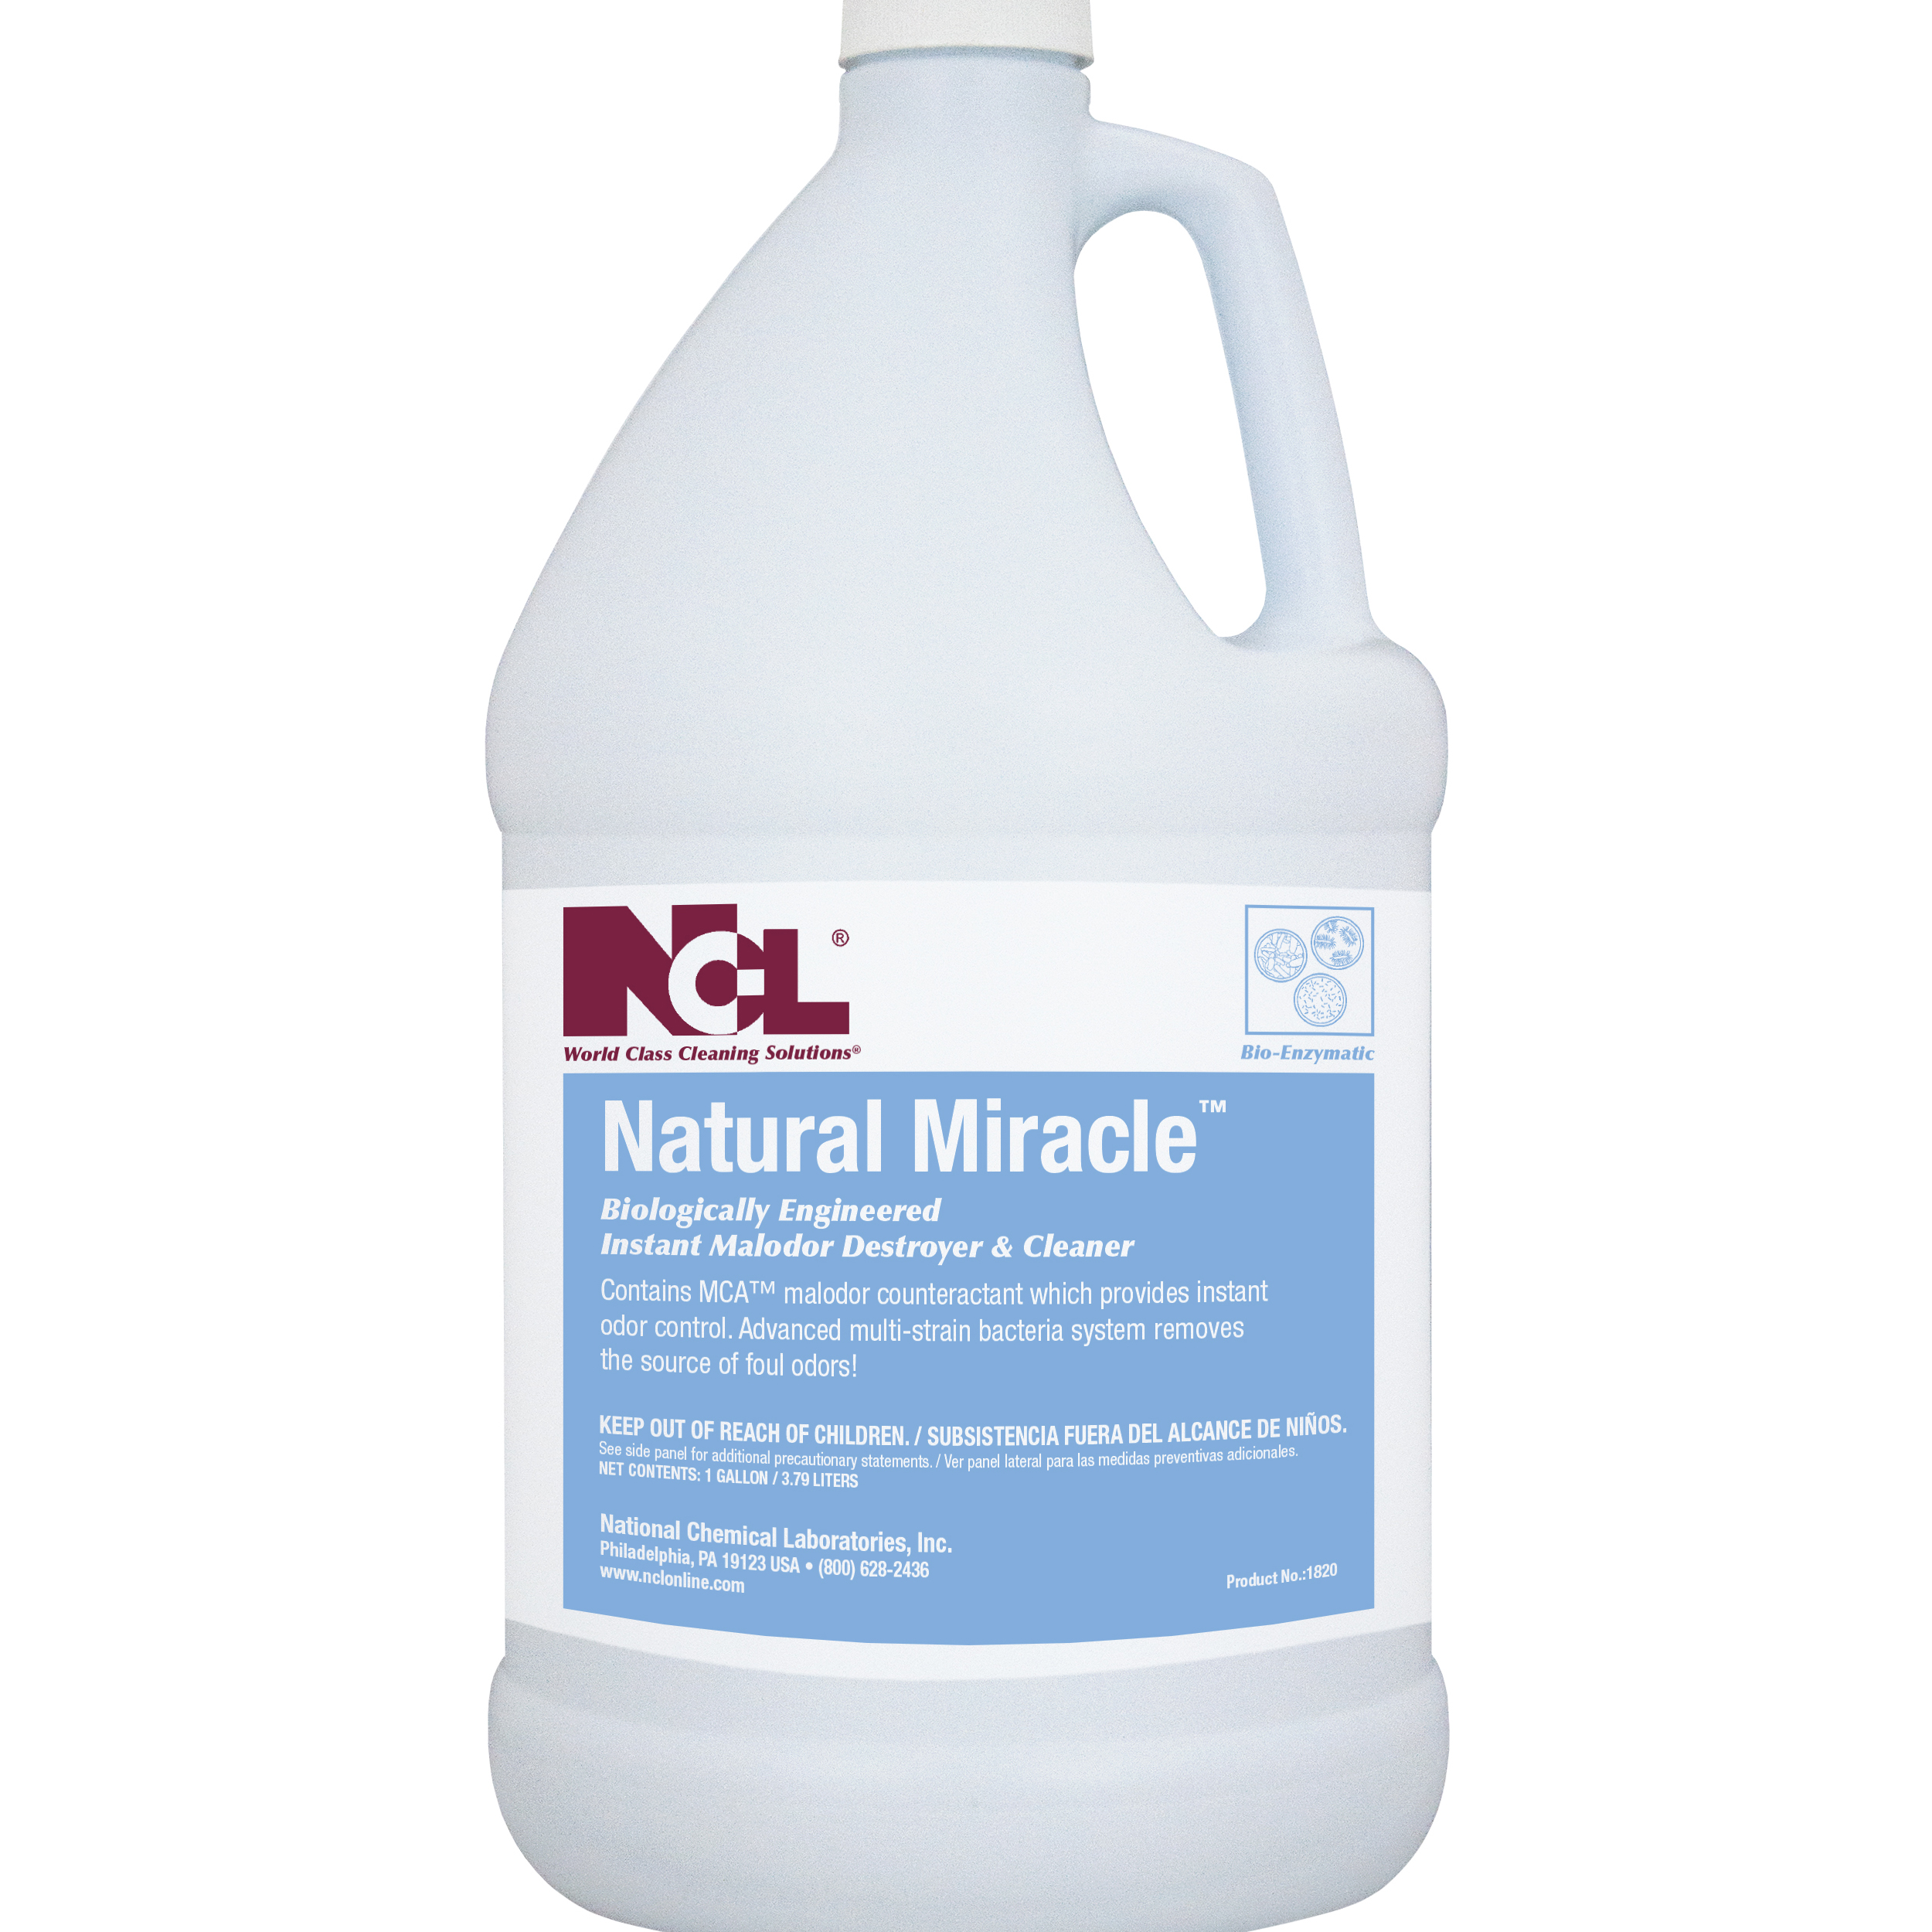  NATURAL MIRACLE Biologically Engineered Instant Malodor Destroyer & Cleaner 4/1 Gal. Case (NCL1820-29) 